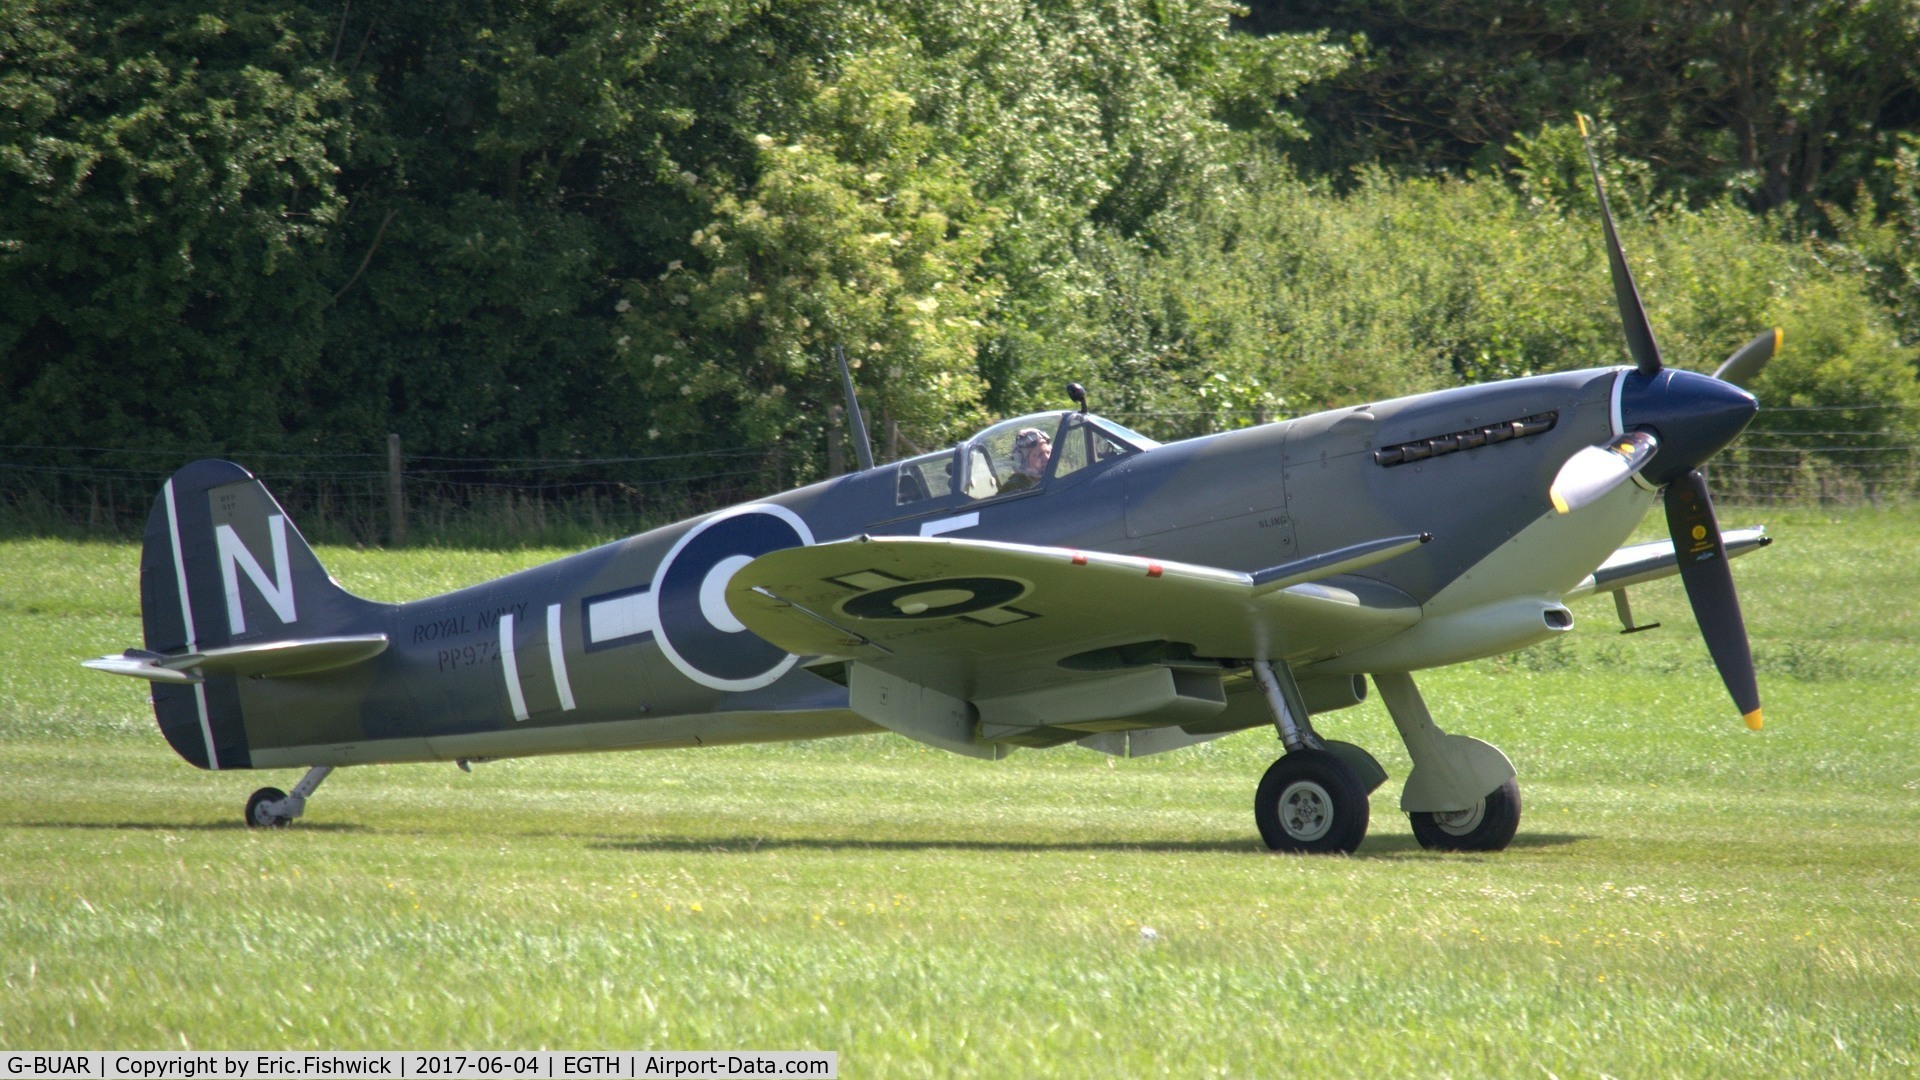 G-BUAR, 1944 Supermarine 358 Seafire LF.III C/N AIR/2605/C23(C), 2. PP972 at Shuttleworth Collection's 'Fly Navy,' June 2017.